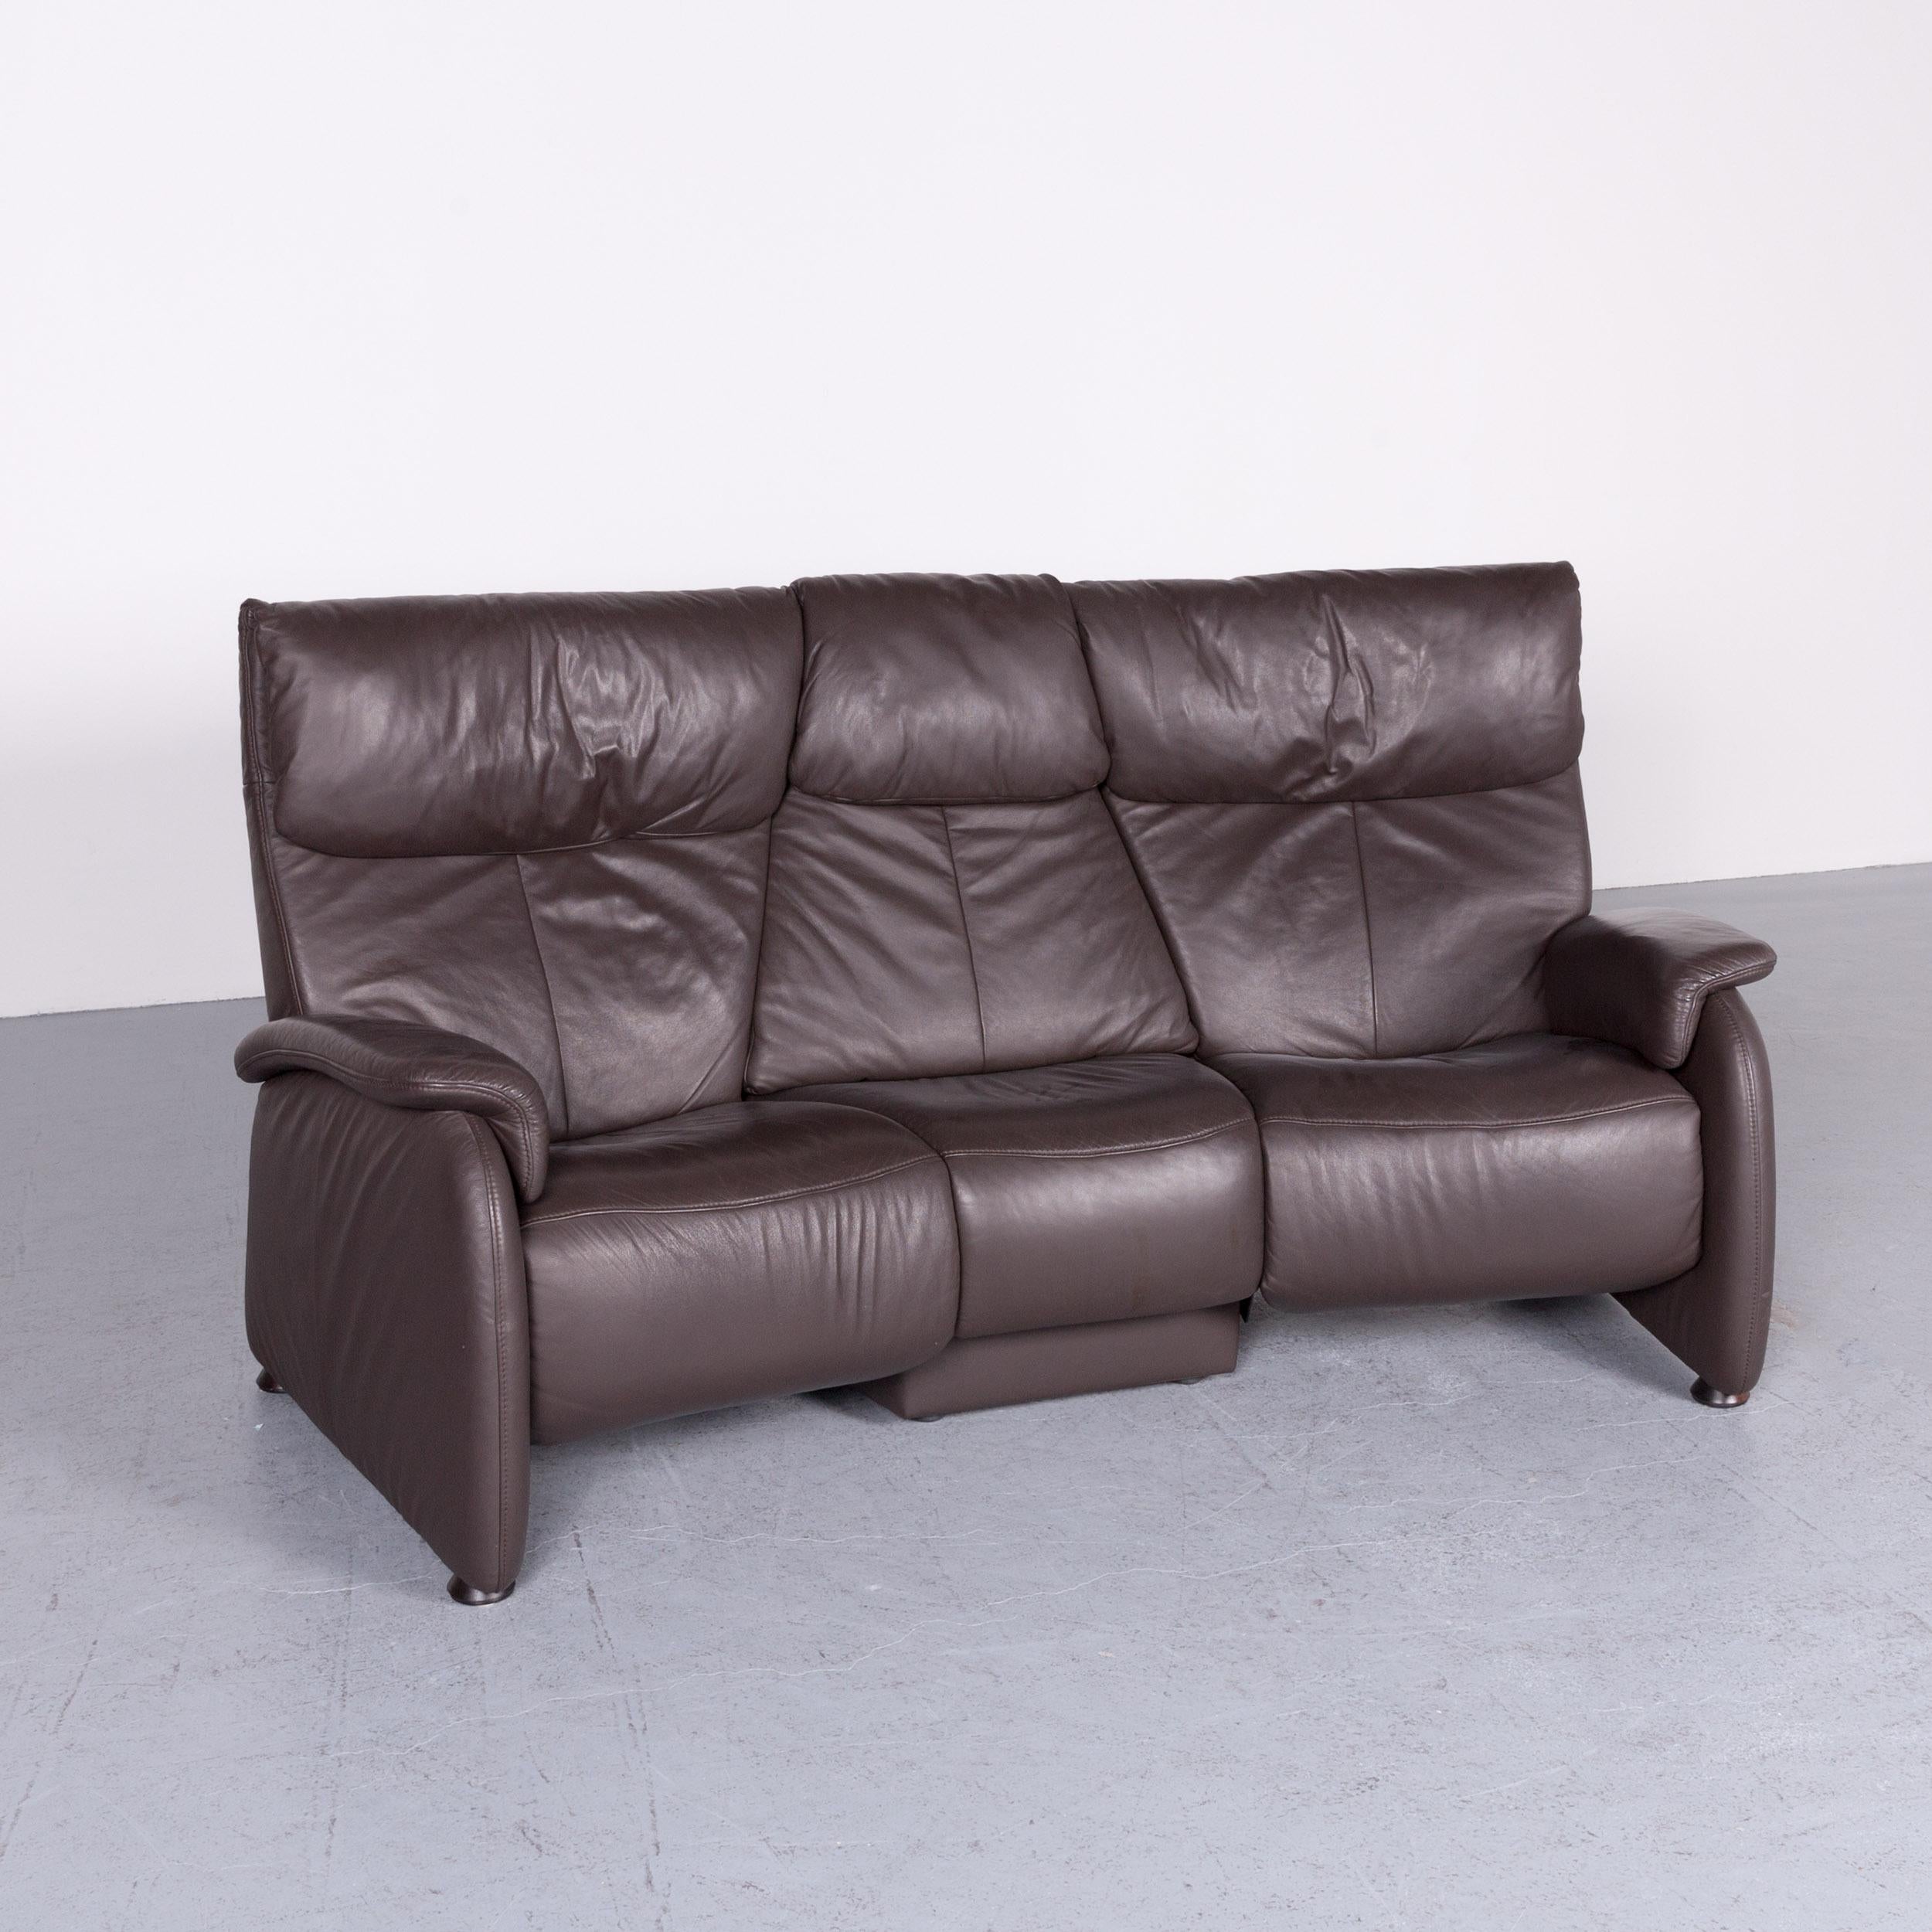 Himolla Trapez sofa brown leather three-seat couch recliner function.